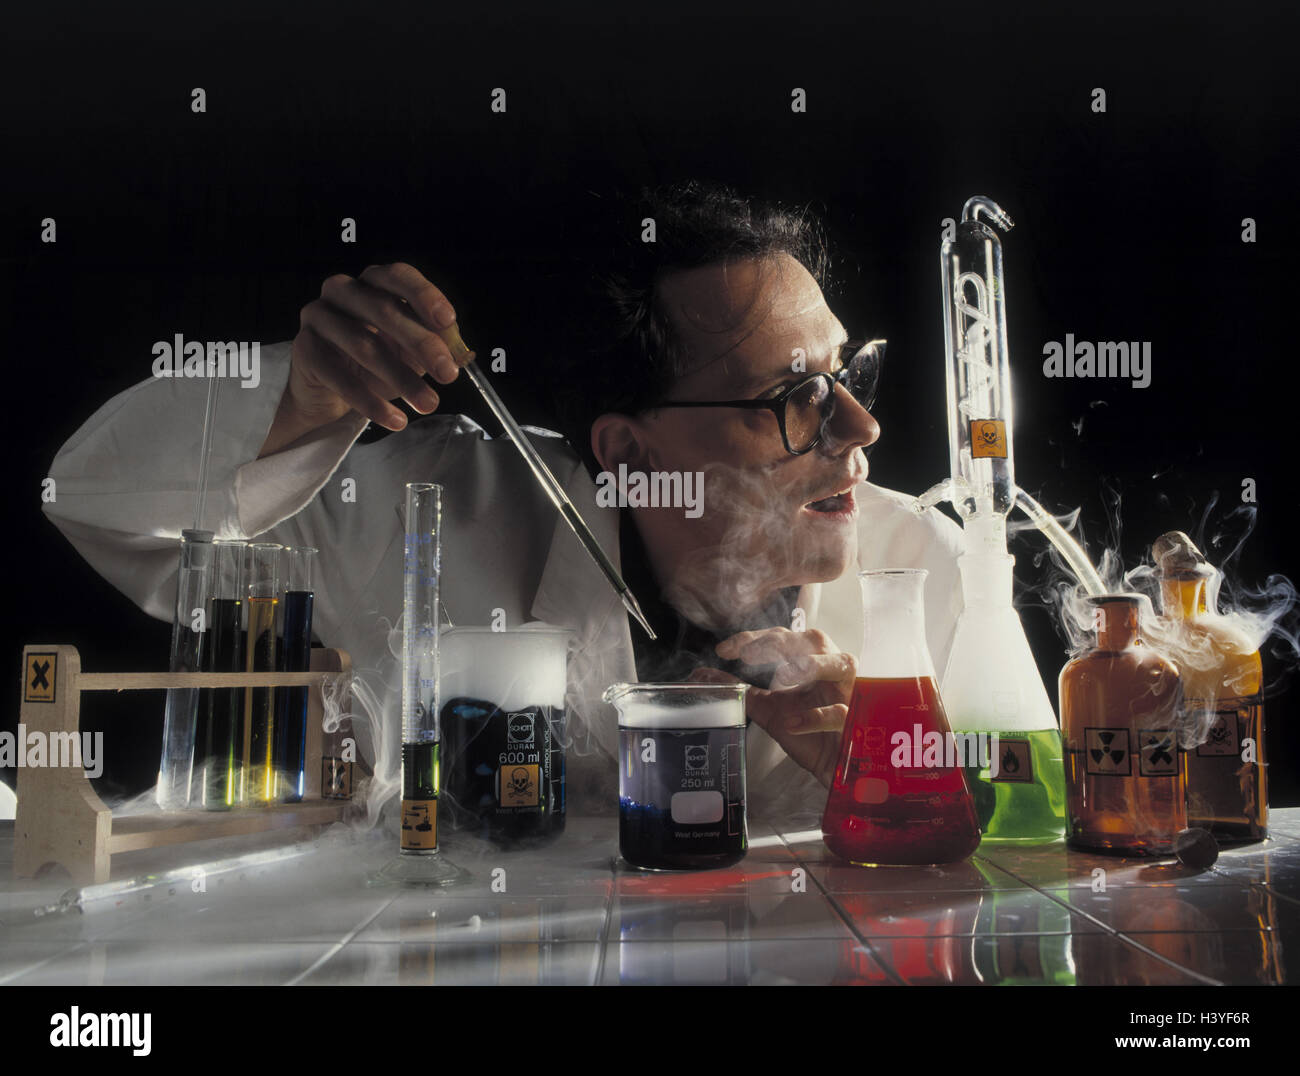 Laboratory, chemist, attempt, facial play, astonishment inside, chemistry, chemically, begin, reaction, observe, glass Bottles, liquid, liquids, laboratory vessels, test liquids, brightly, chemicals, look, surprises, entrancedly, scientists, science, research, differently, occupation, chemical laboratory, work, work, experiment Stock Photo